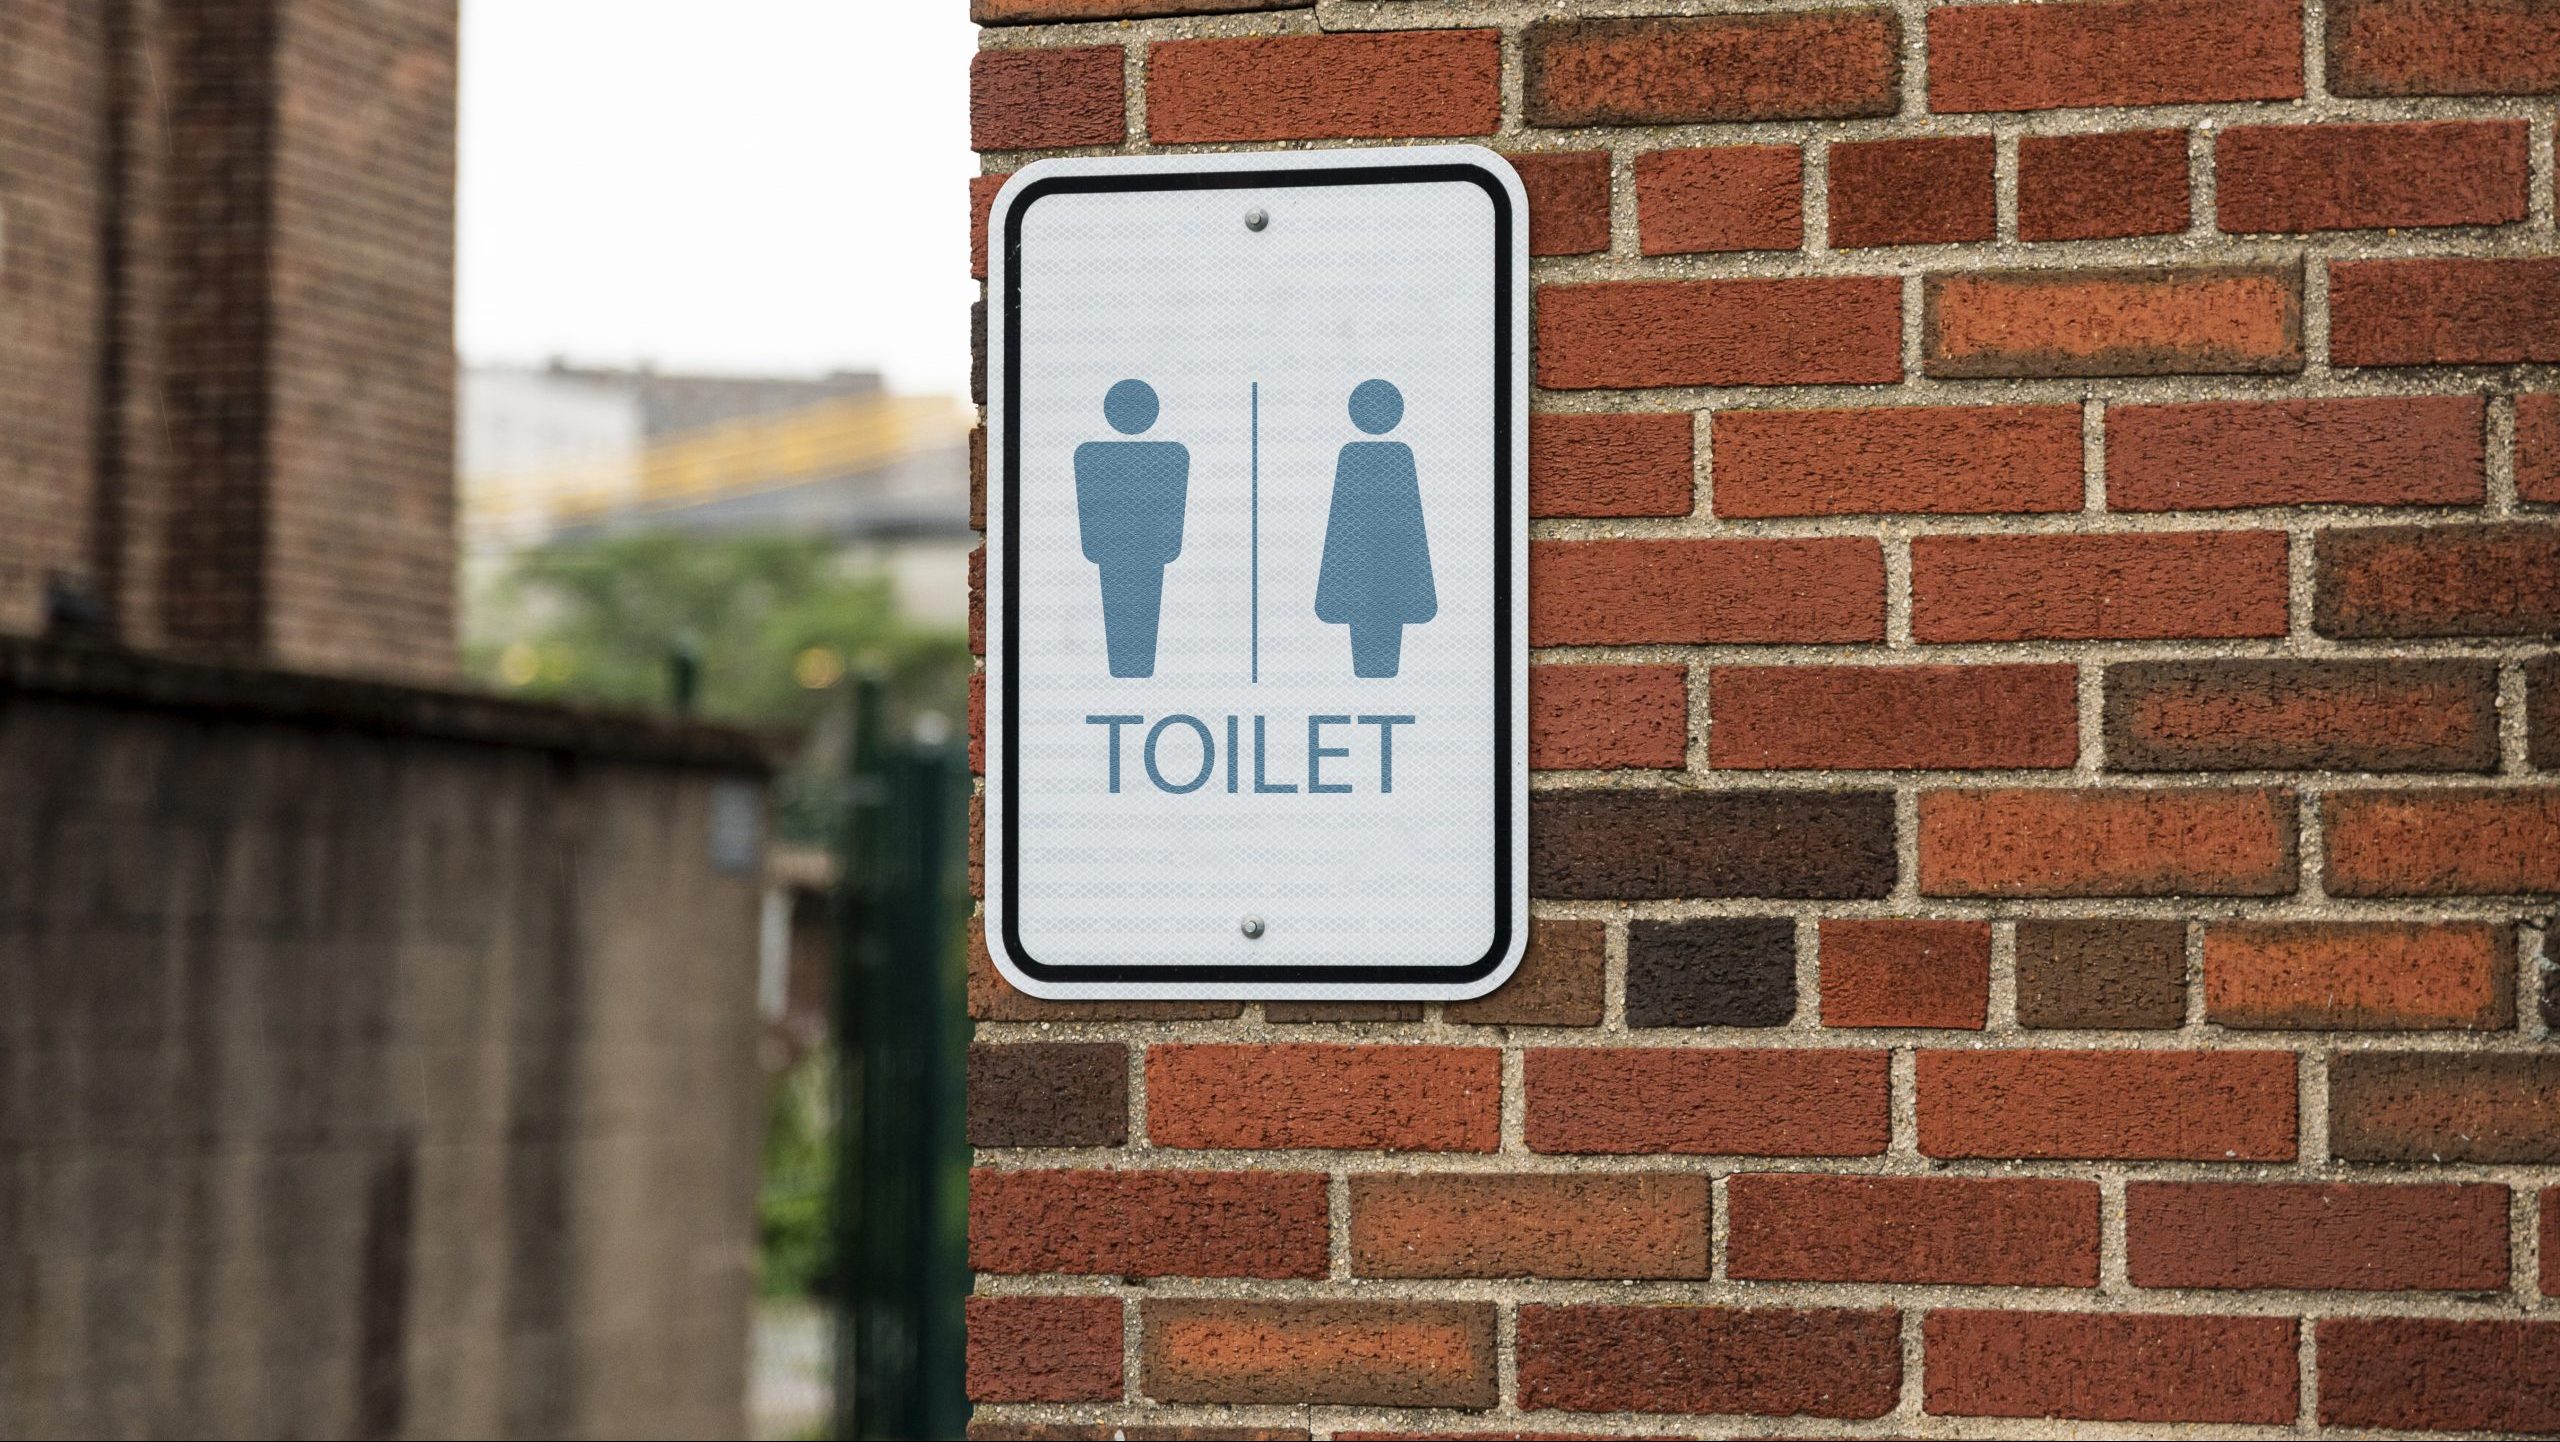 Toilet signage on a brick wall.